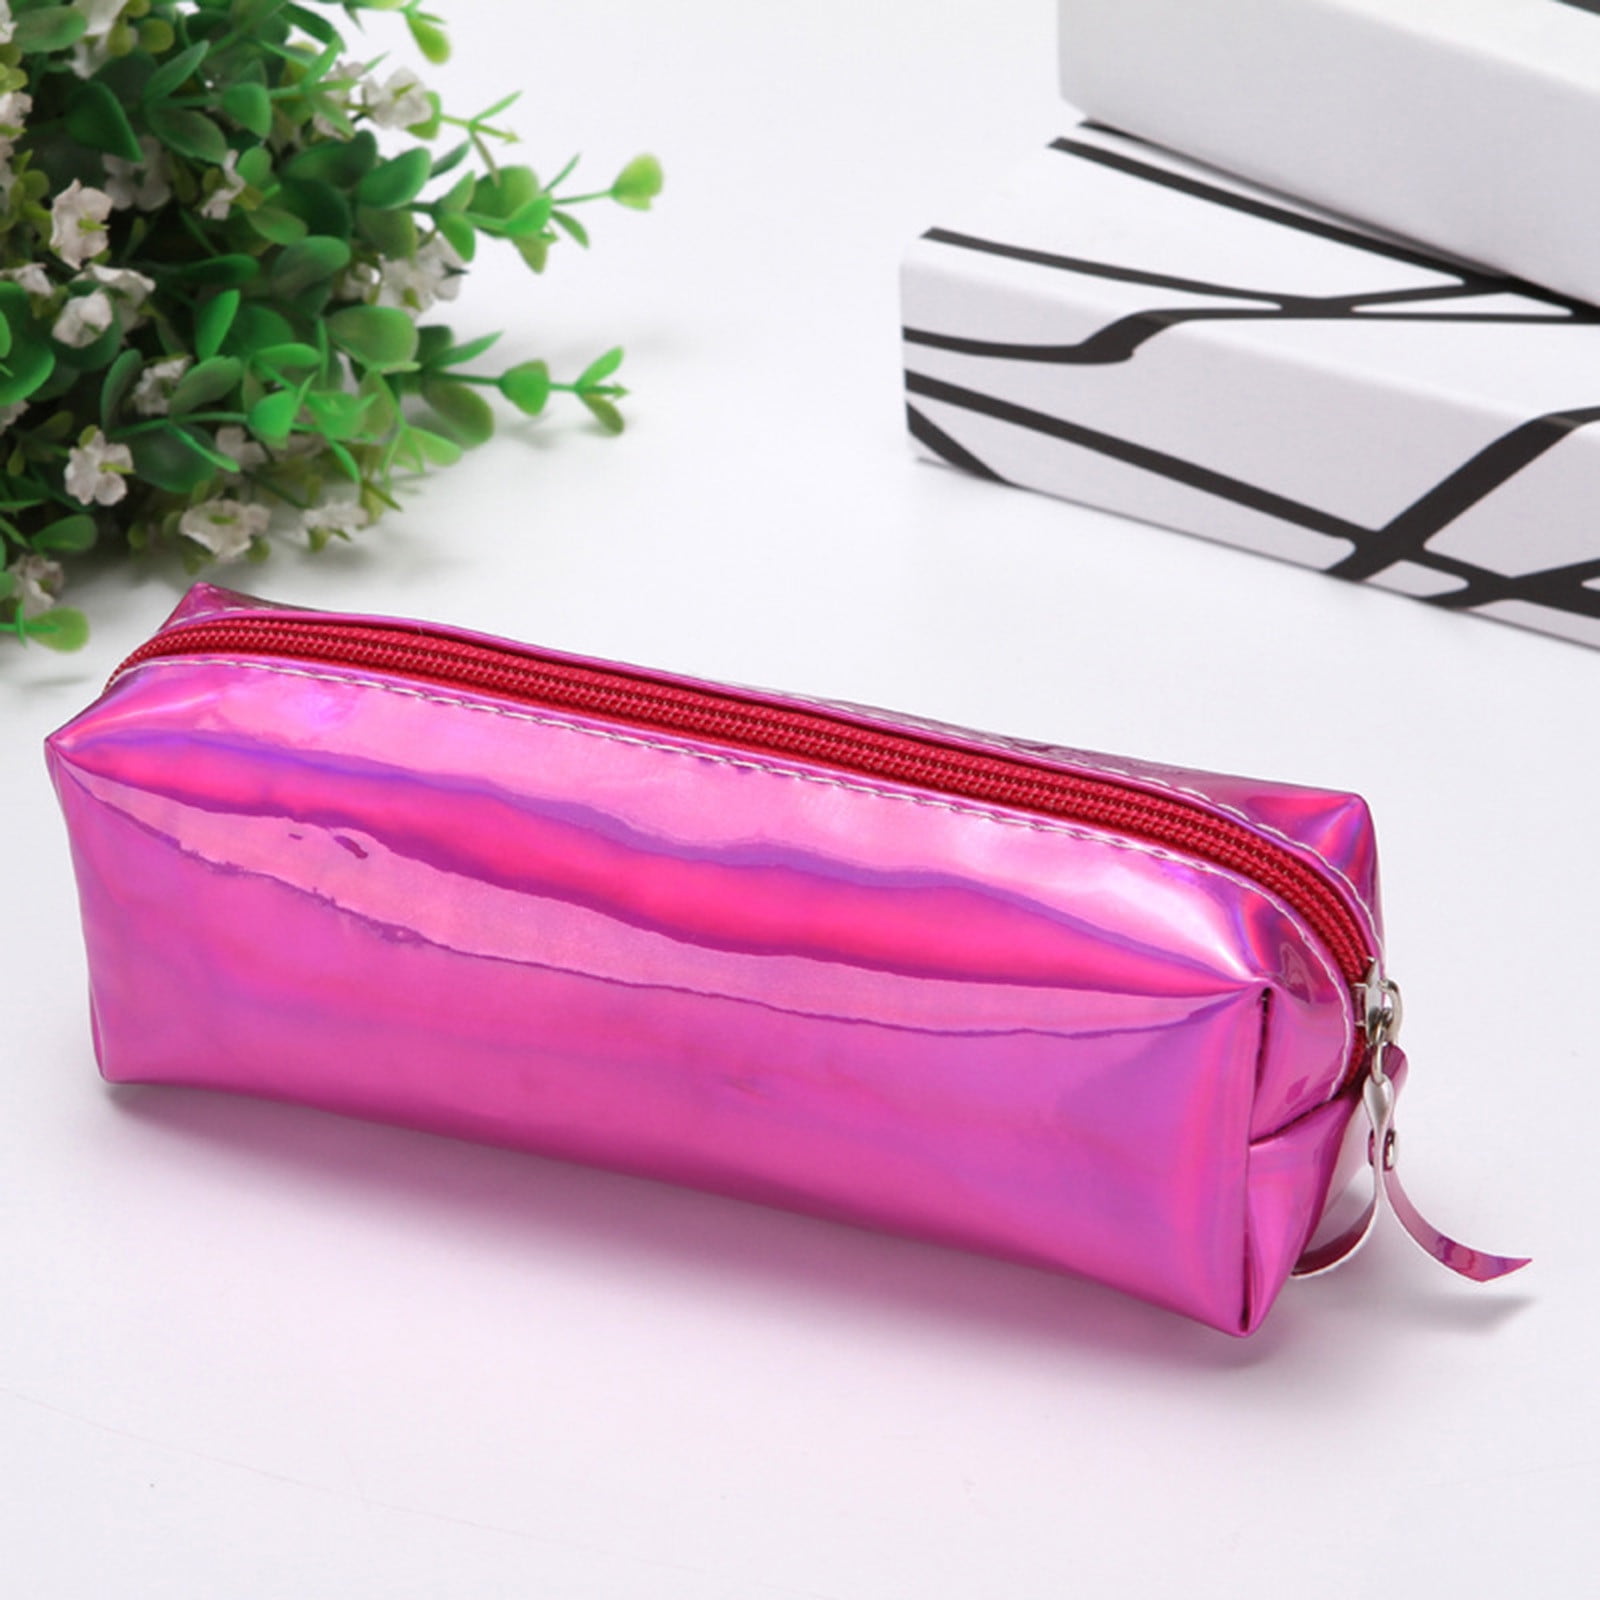 Sdjma Holographic Makeup Bags with Zipper Travel Cosmetic Bags Makeup Pouches Waterproof Pencil Case Toiletry Organizer Case for Home School Office